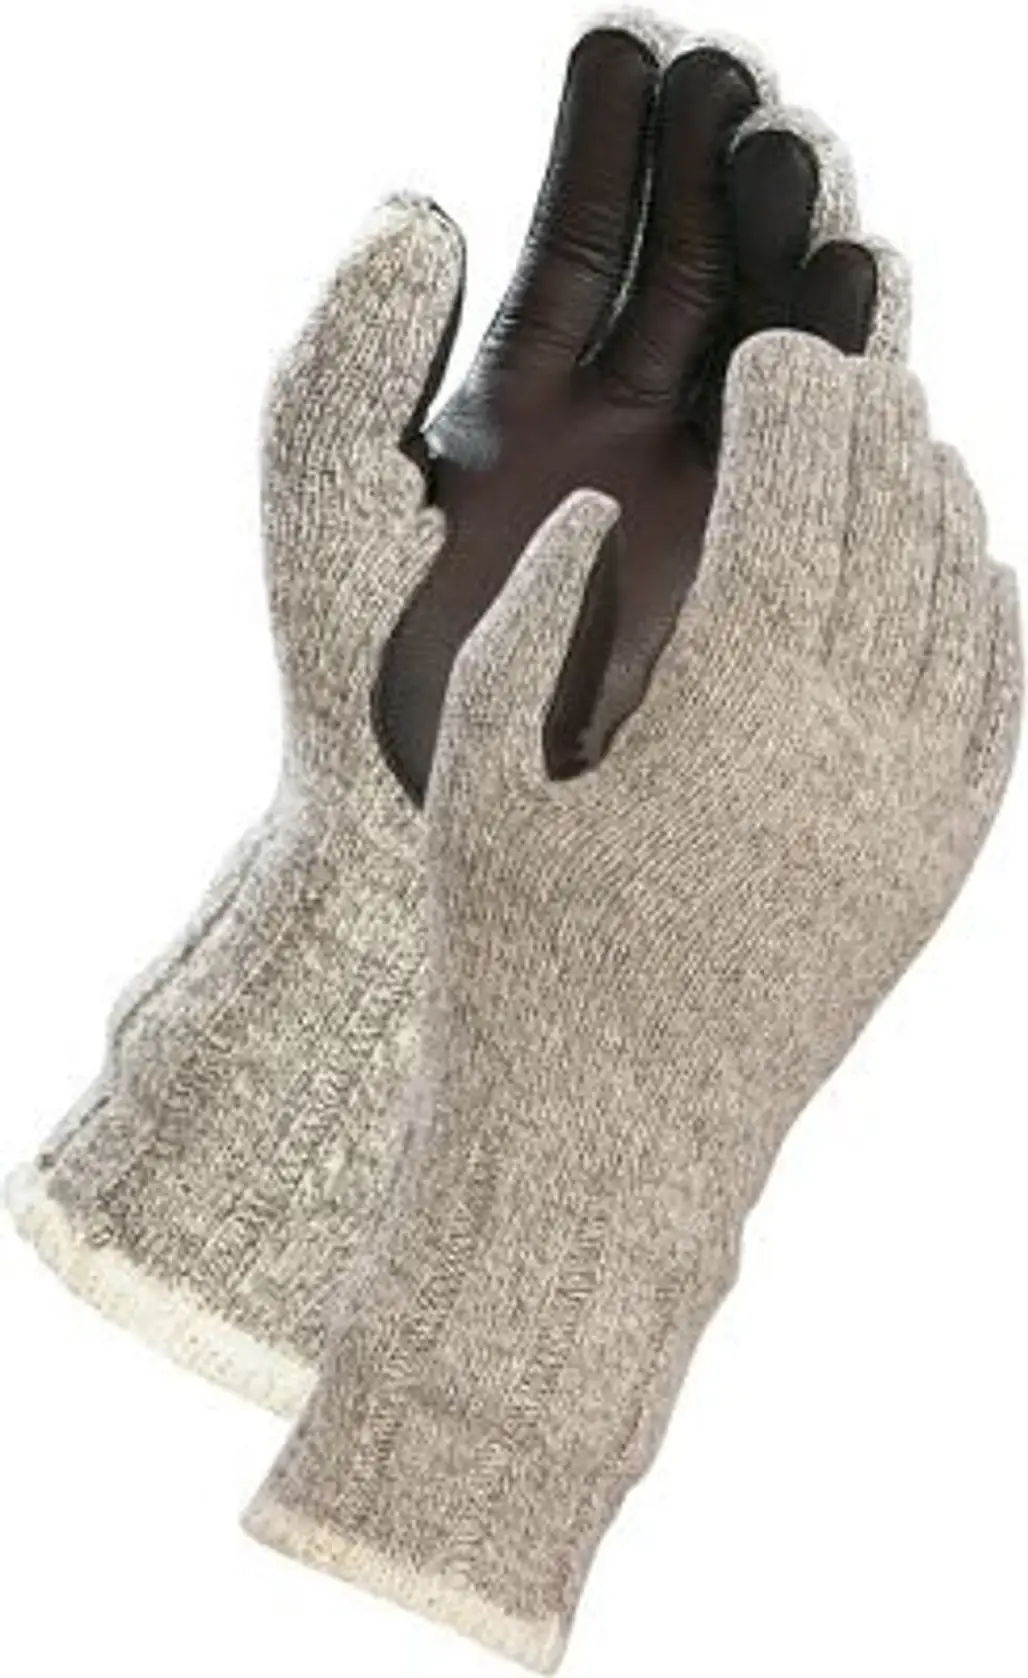 Cabela's Dry-plus®/Thinsulate™ Leather Palm Gloves